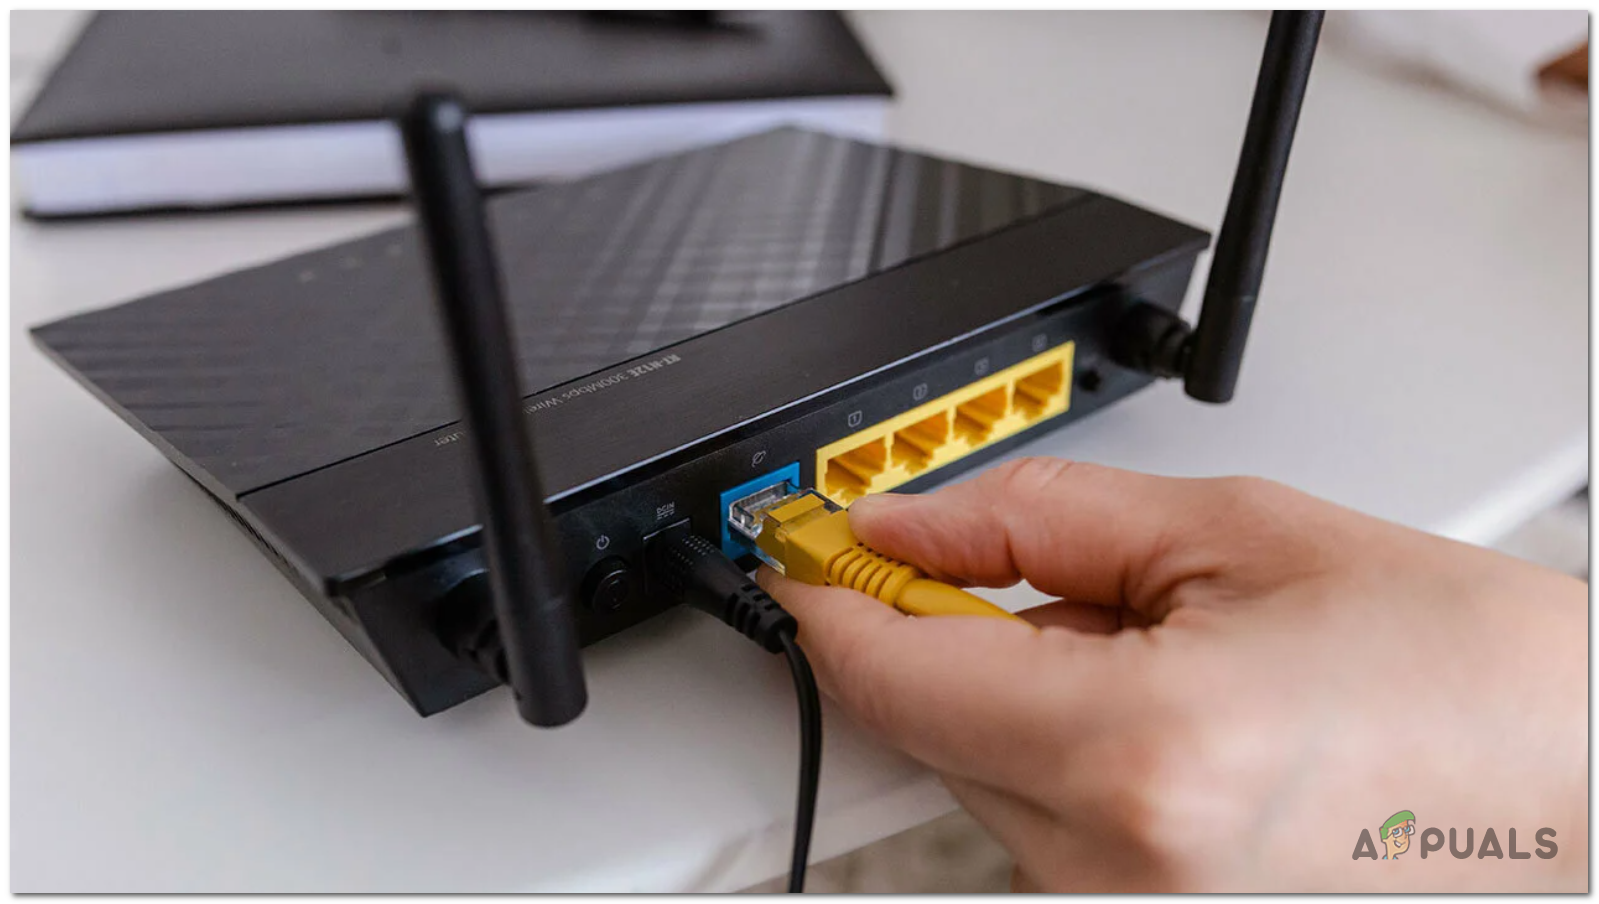 Switching the connection to Ethernet